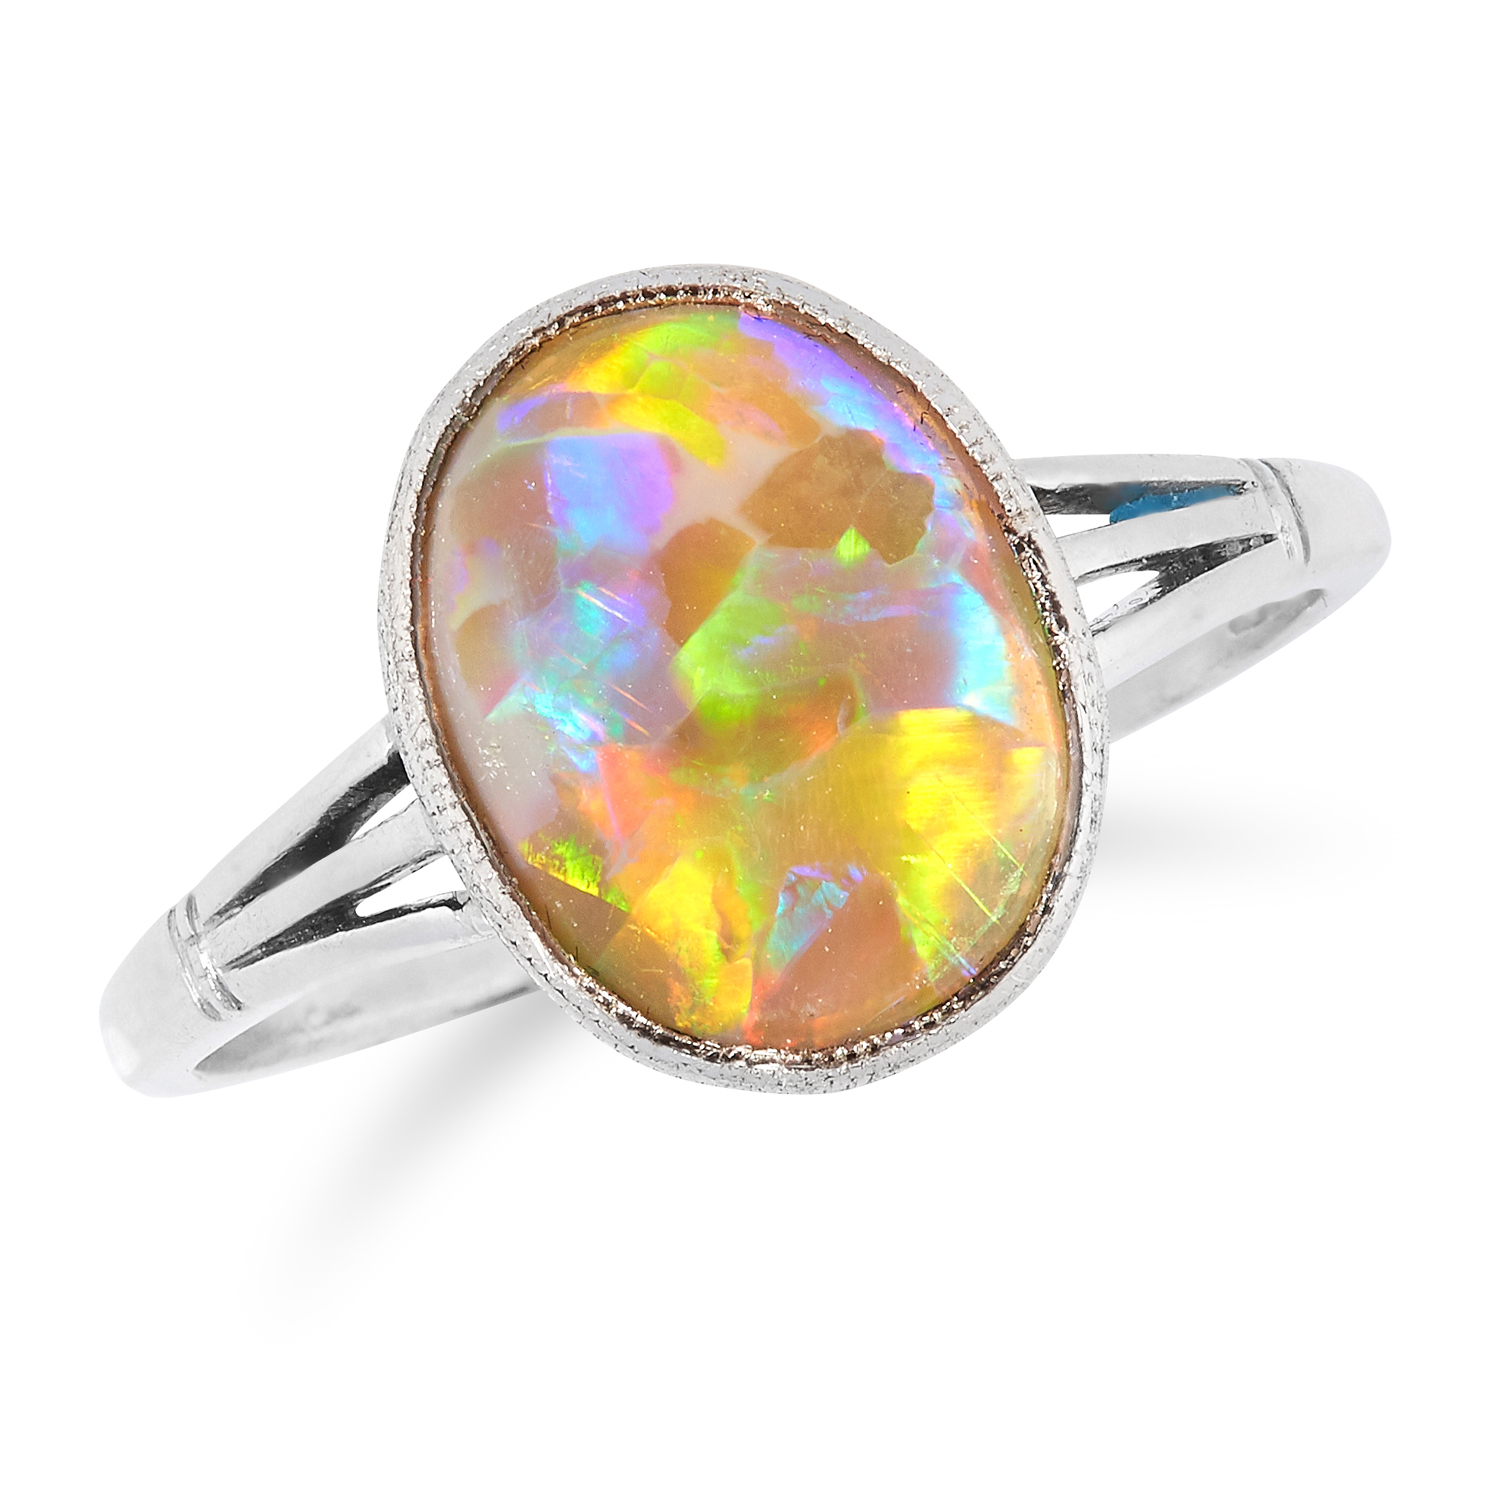 A BLACK OPAL DRESS RING set with an opal of approximately 0.95 carats, size M / 6, 3.3g.